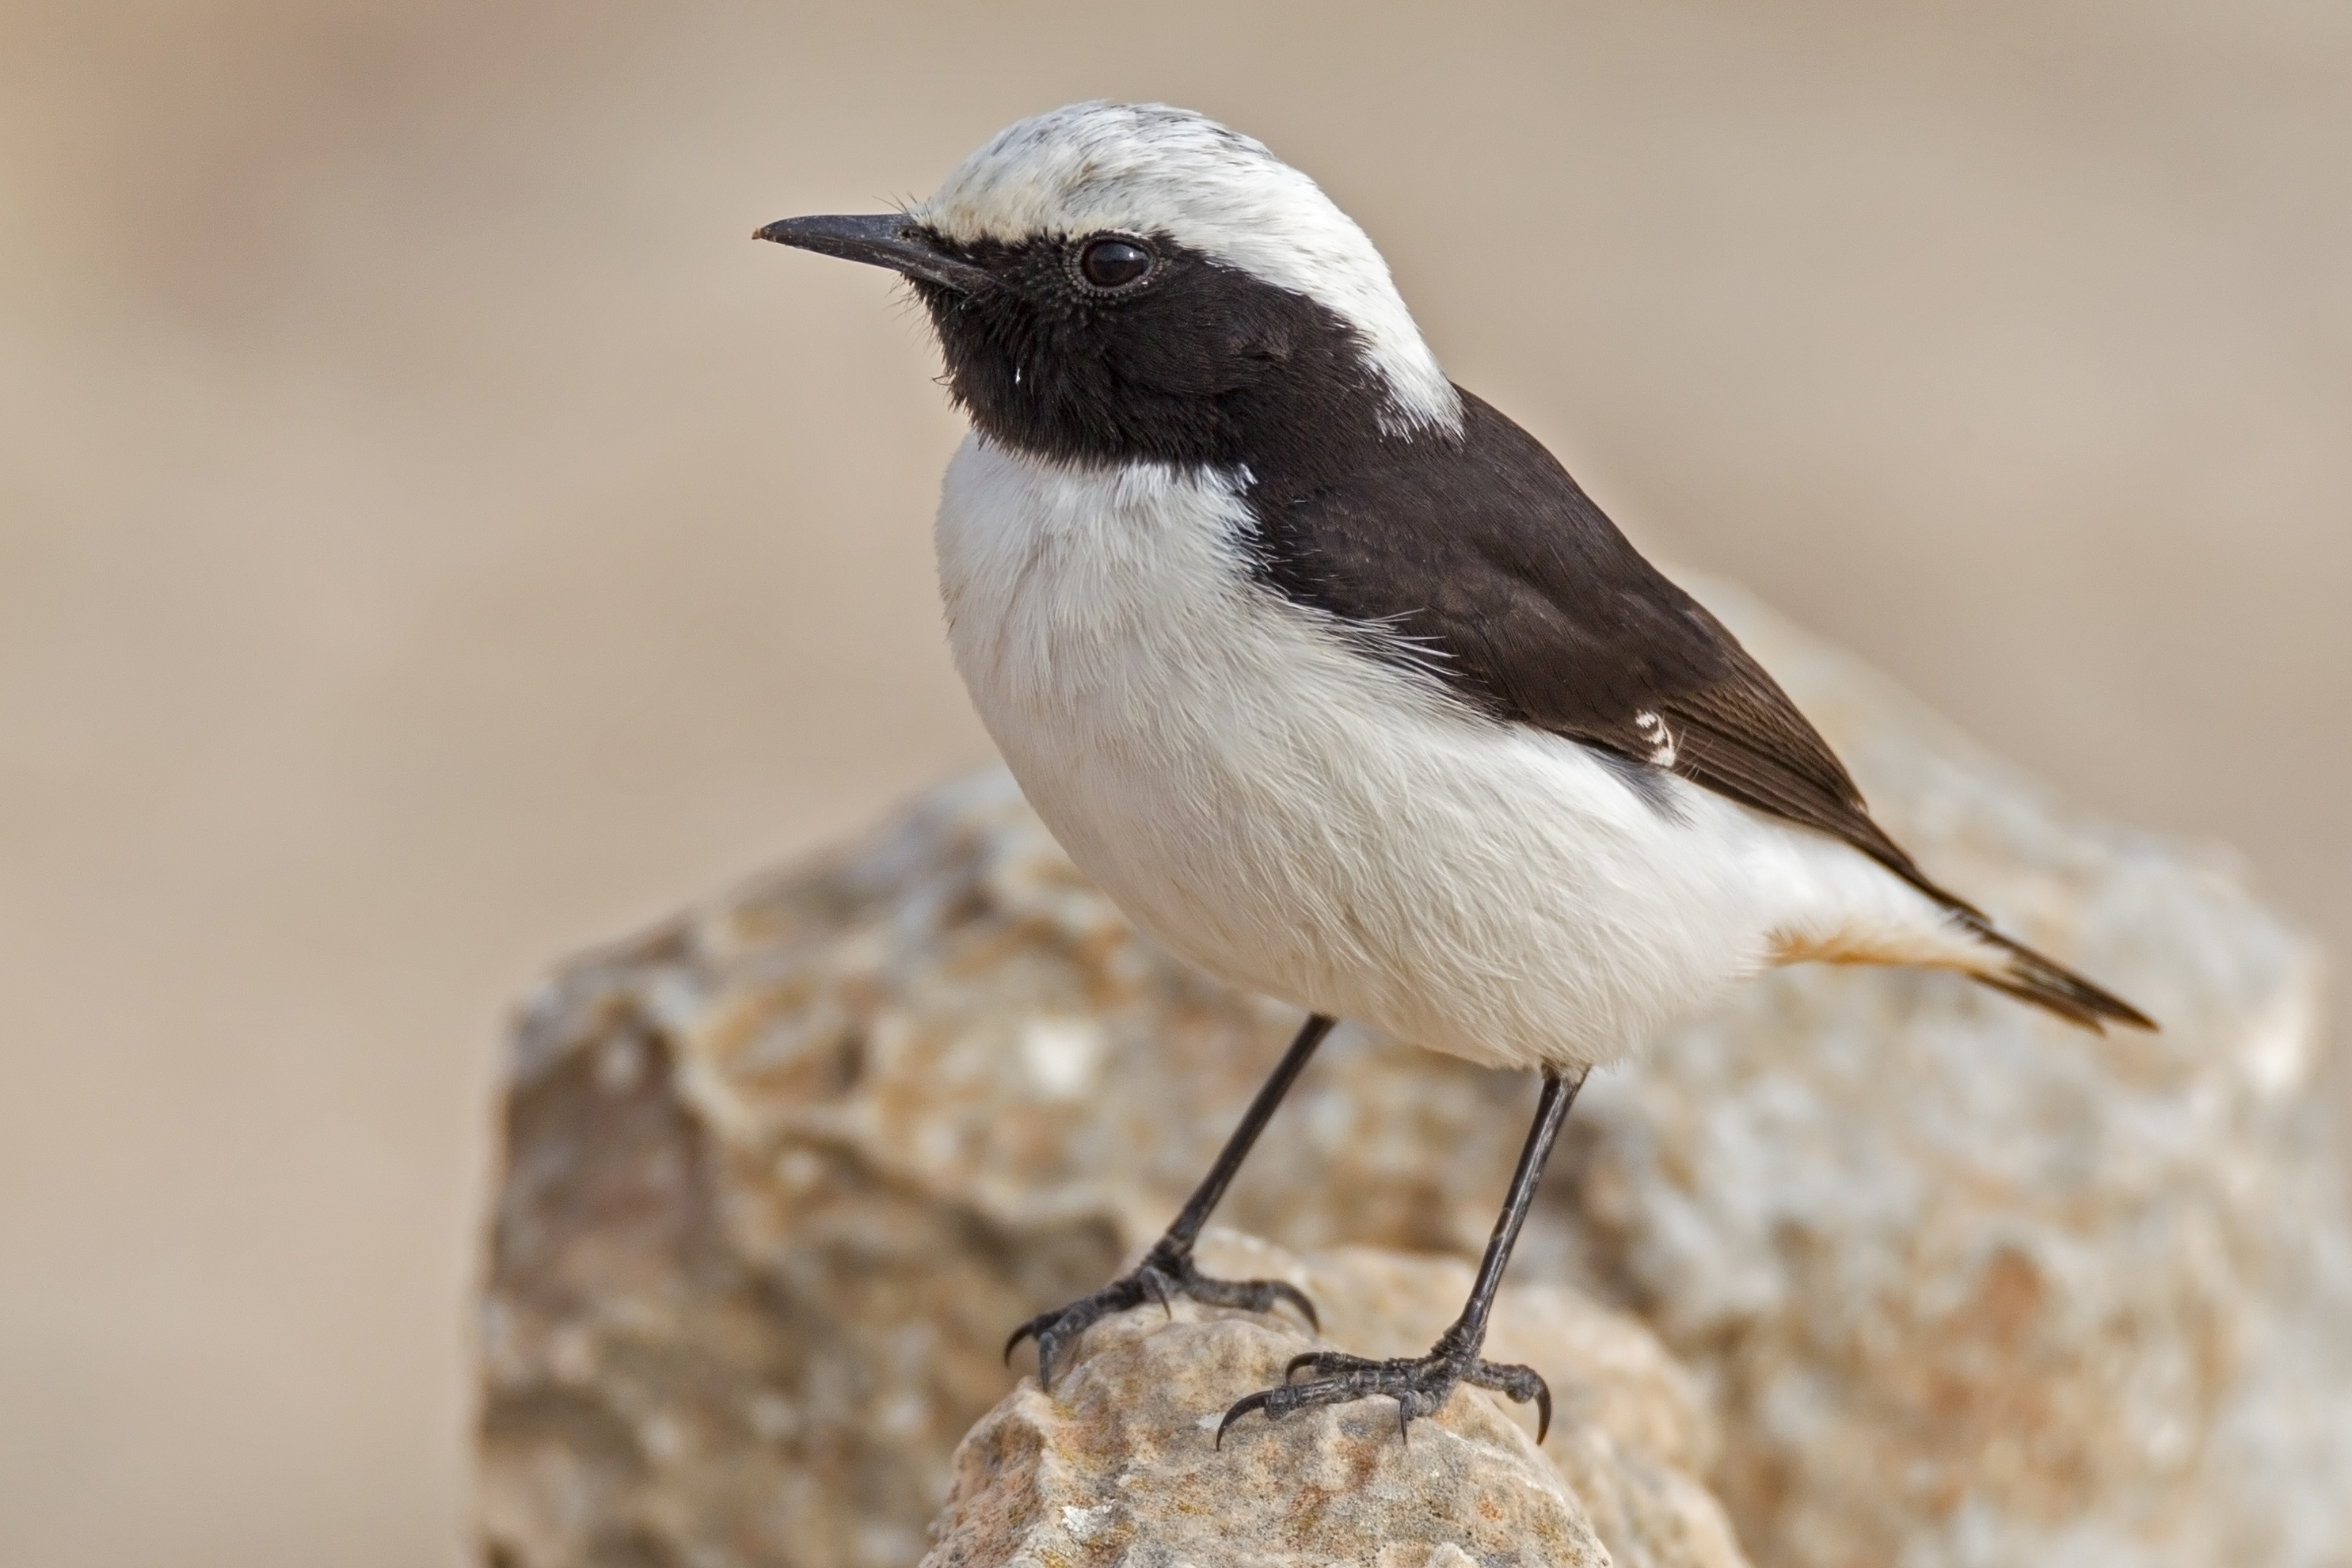 Mourning wheatear